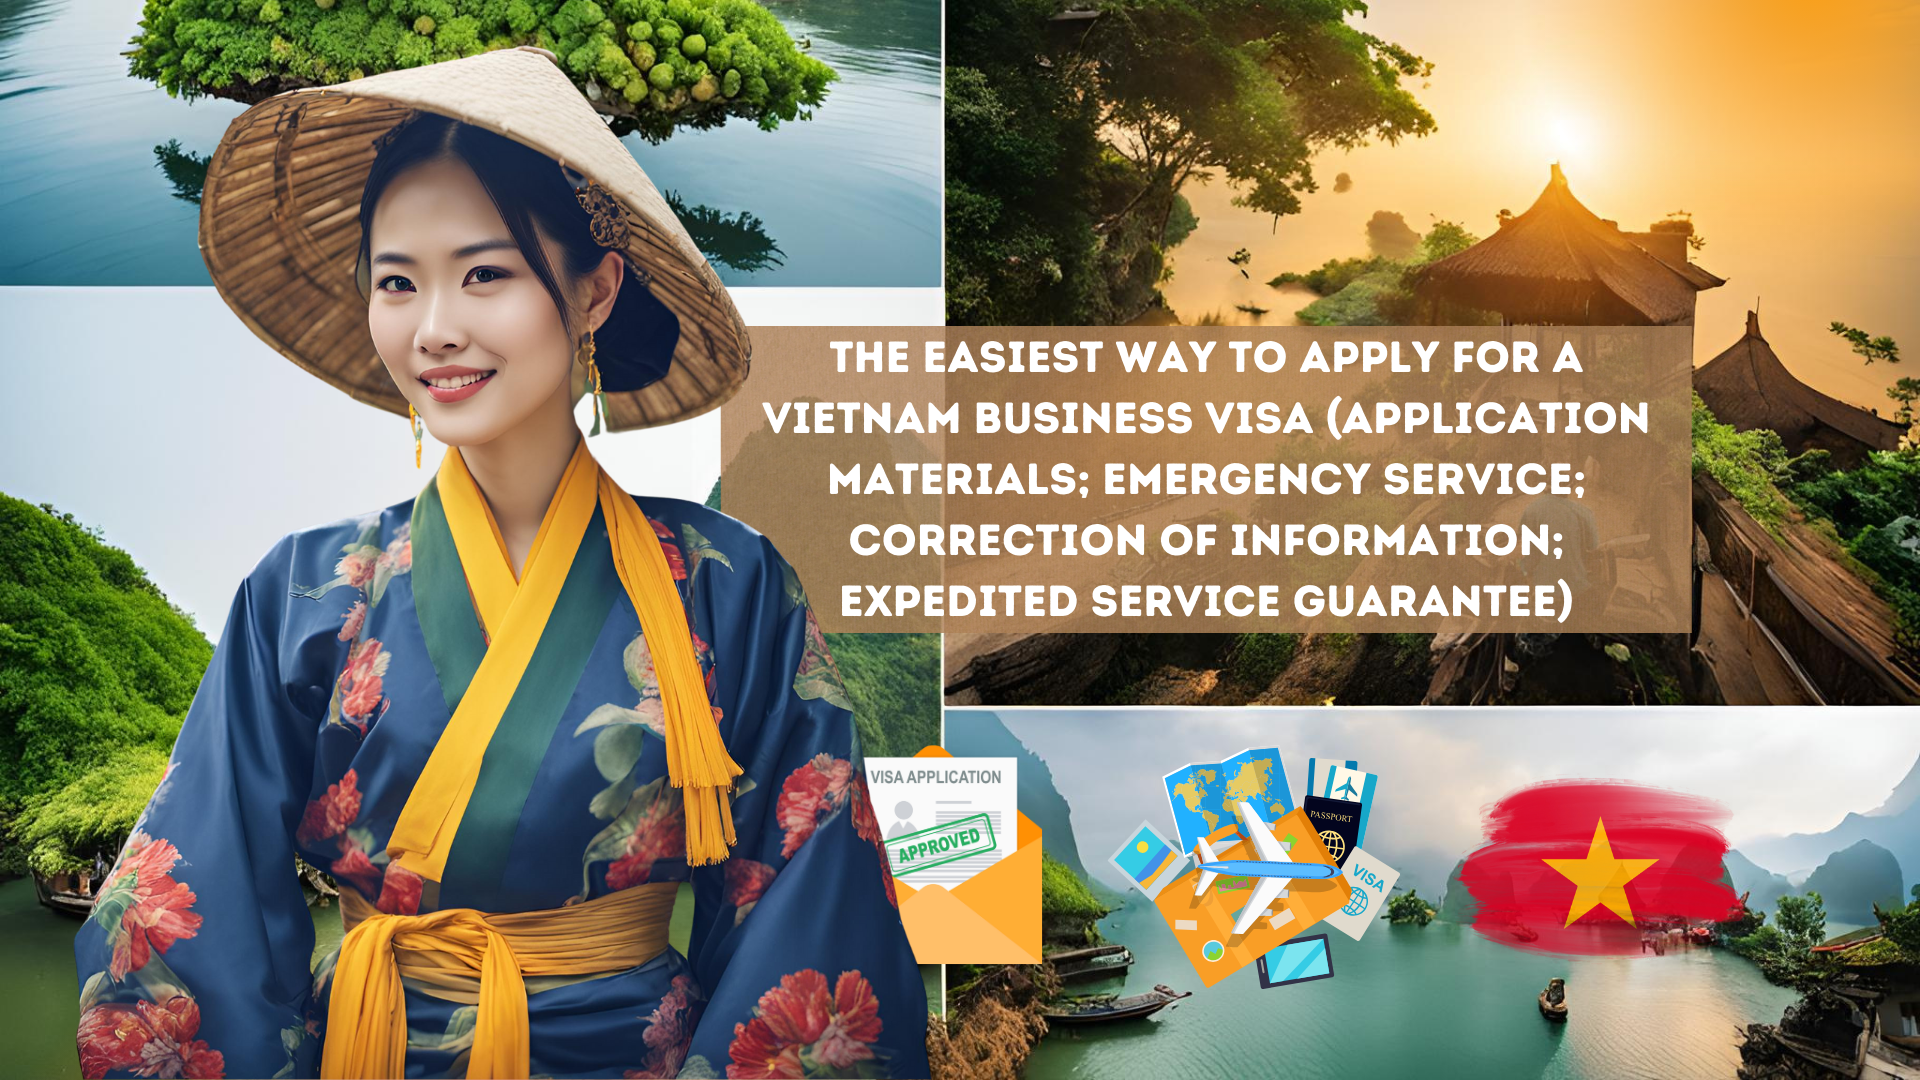 The easiest way to apply for a Vietnam business visa (application materials; emergency service; correction of information; expedited service guarantee)